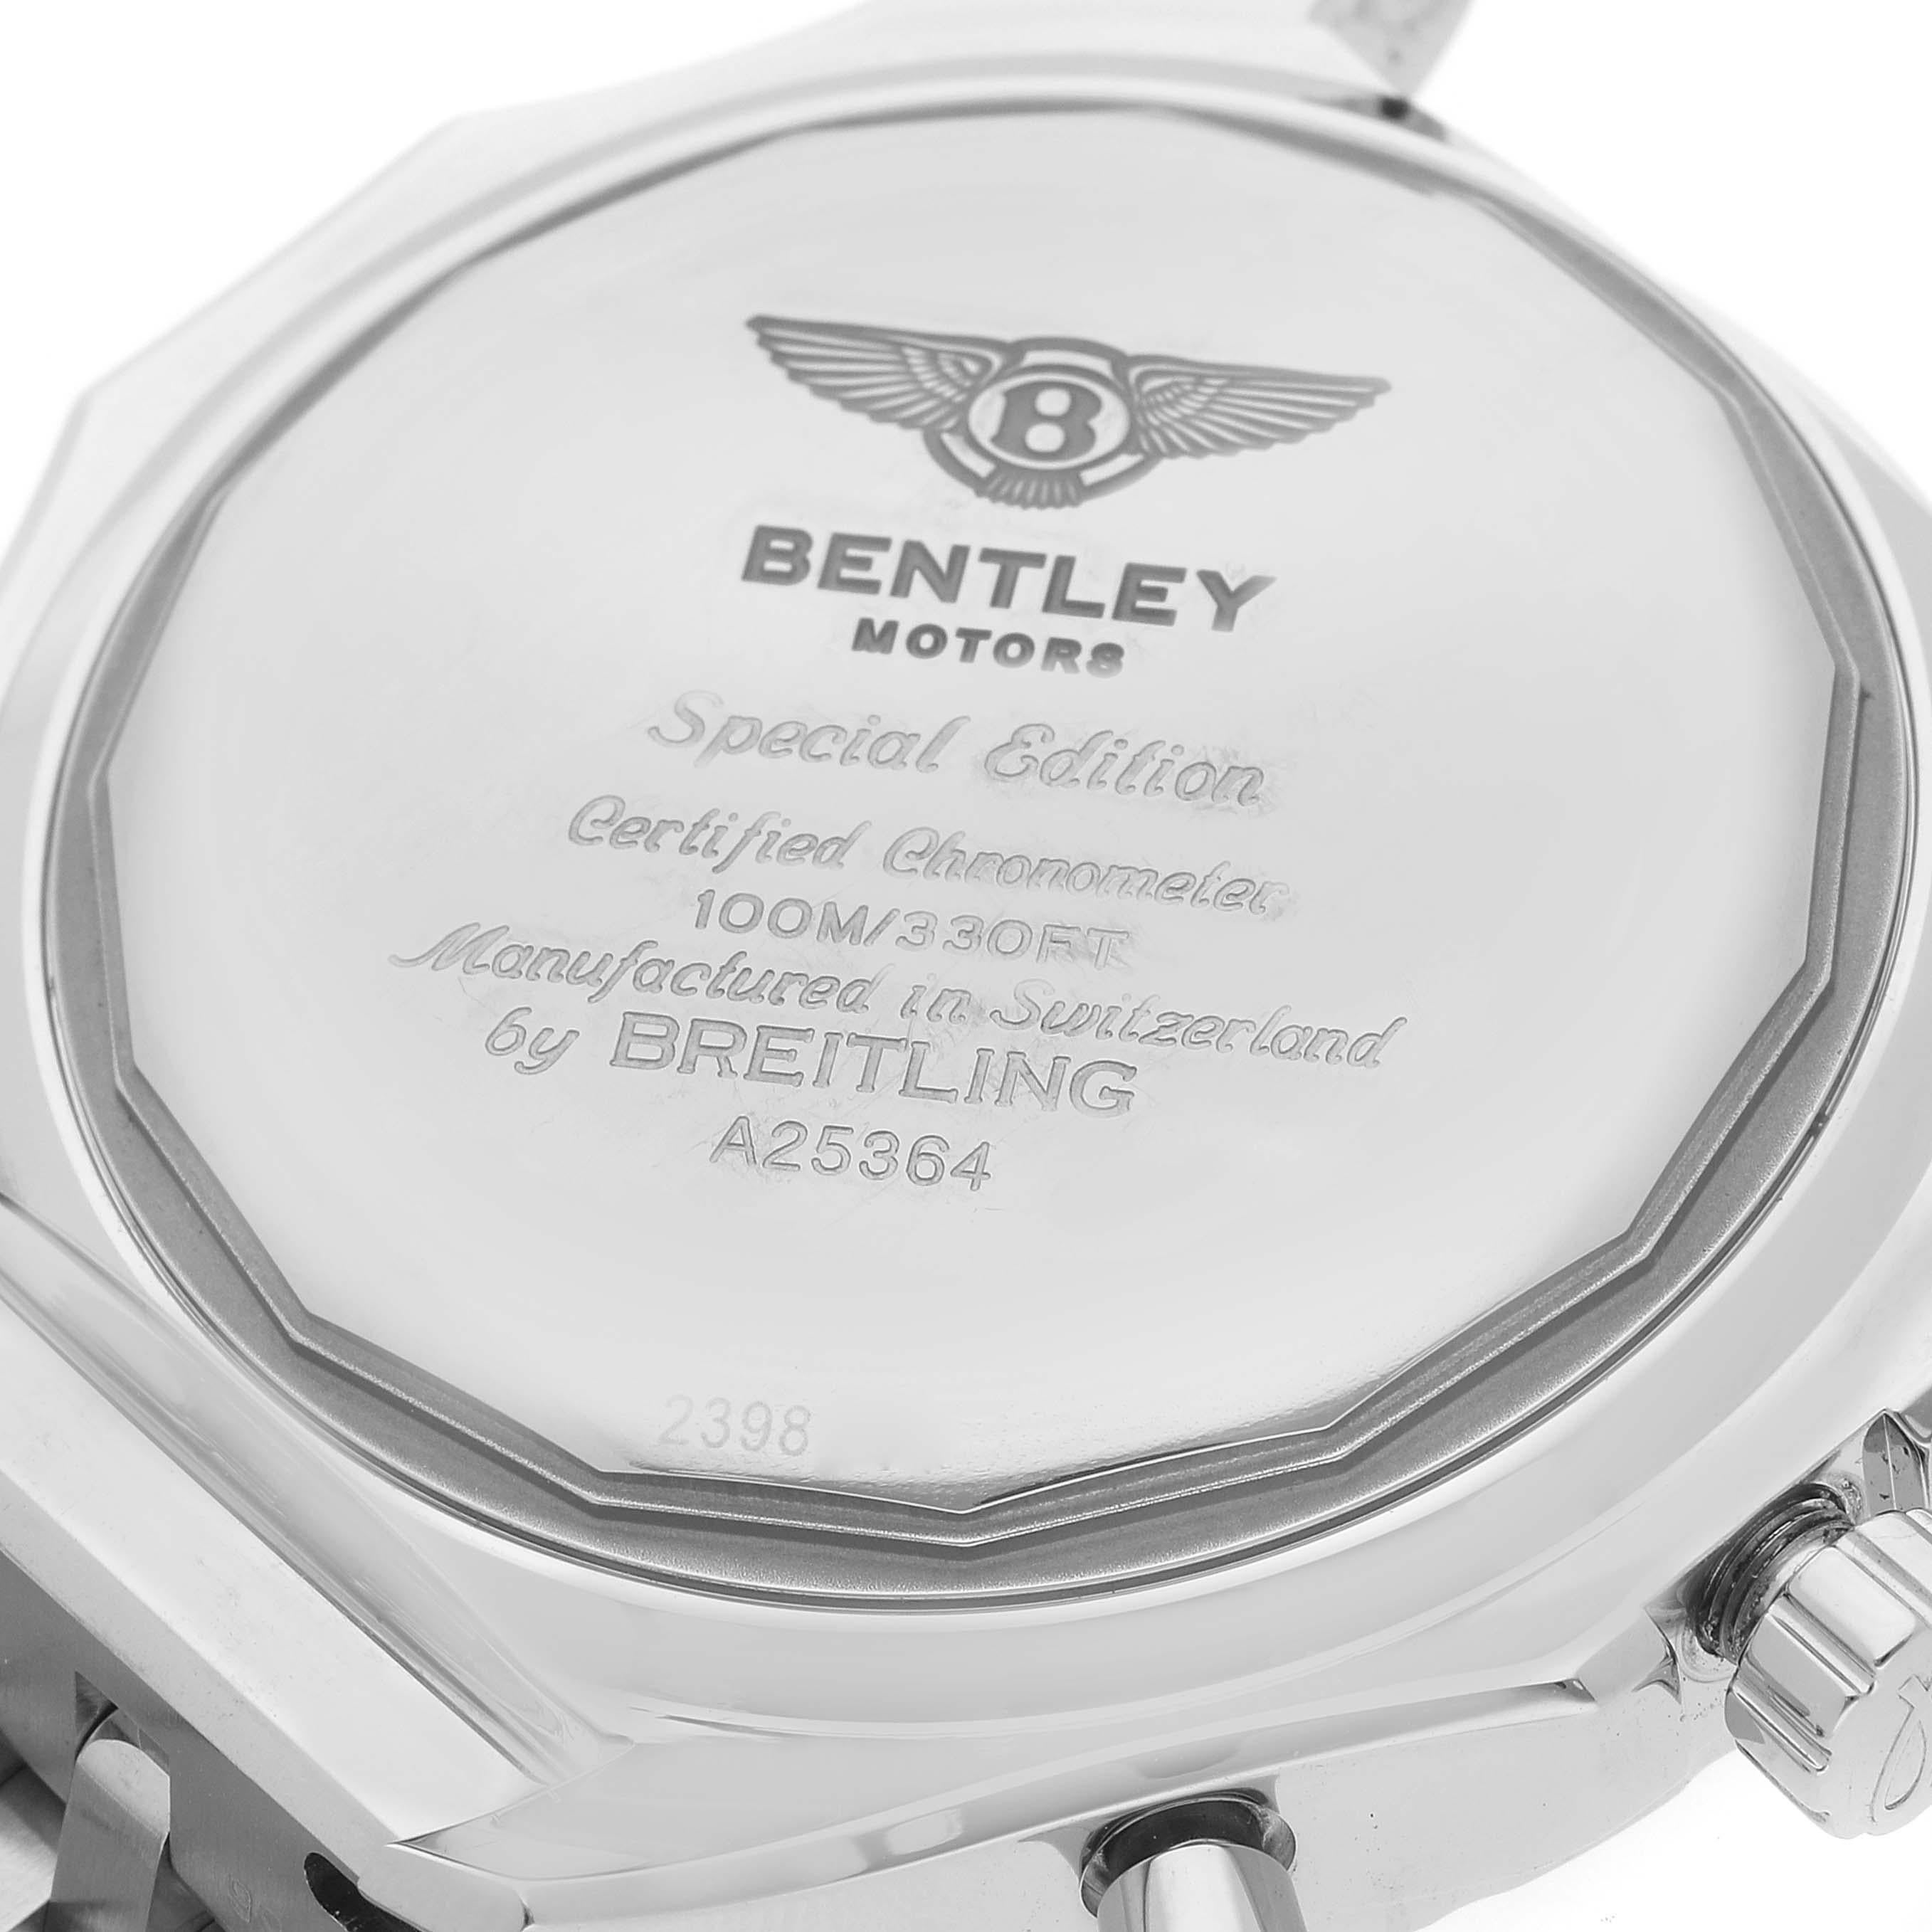 Breitling Bentley Motors Special Edition Steel Mens Watch A25364 Papers 2